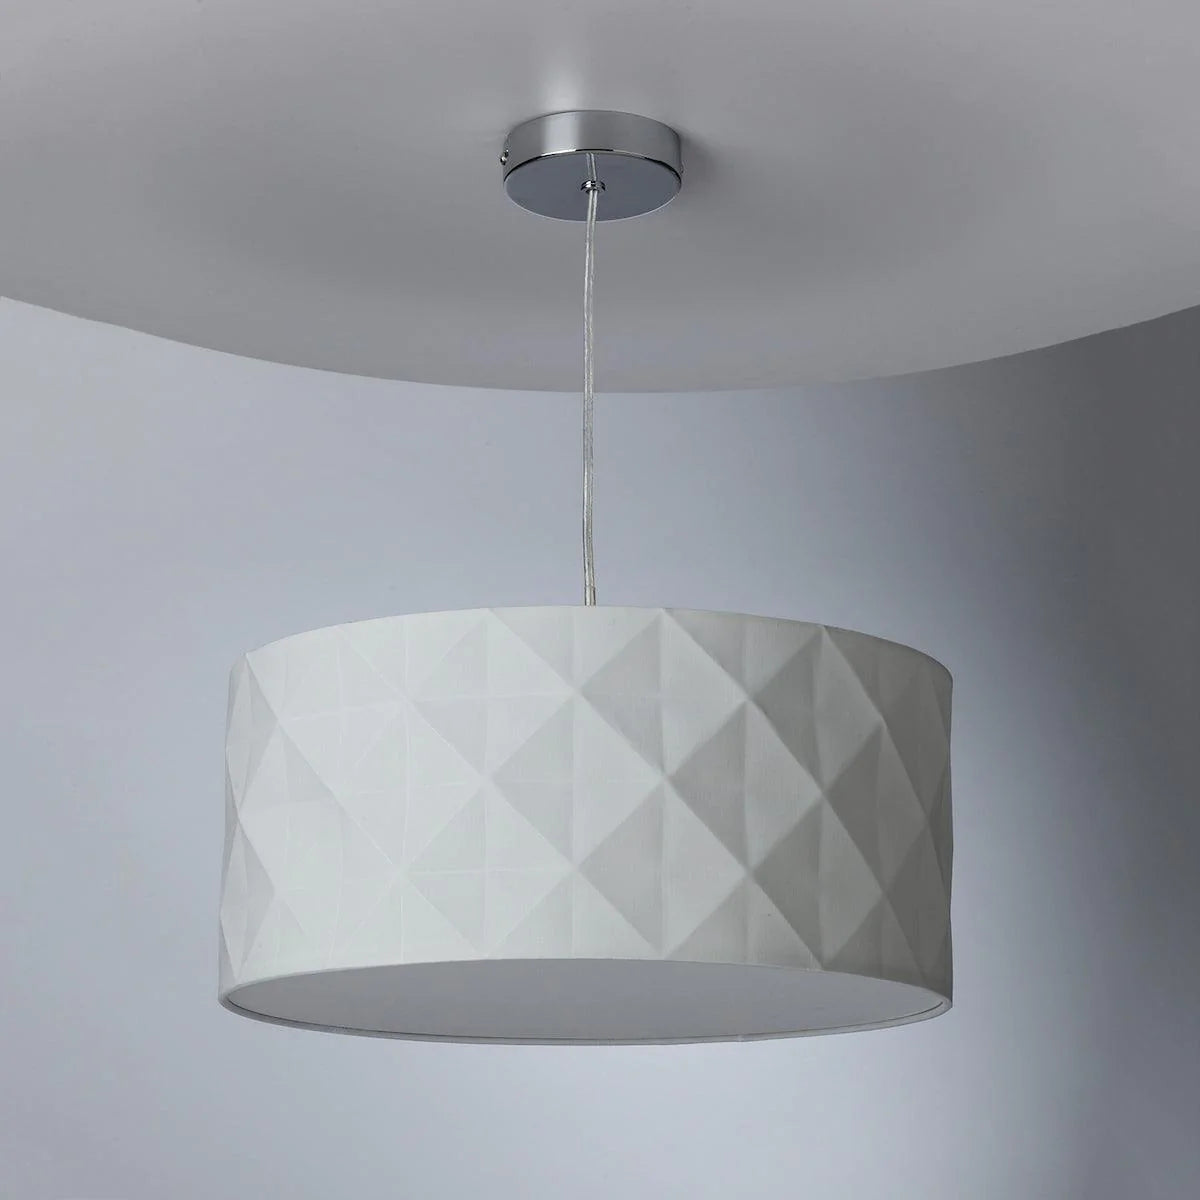 Aisha Faceted Easy Fit Shade White AIS652 - Peter Murphy Lighting & Electrical Ltd